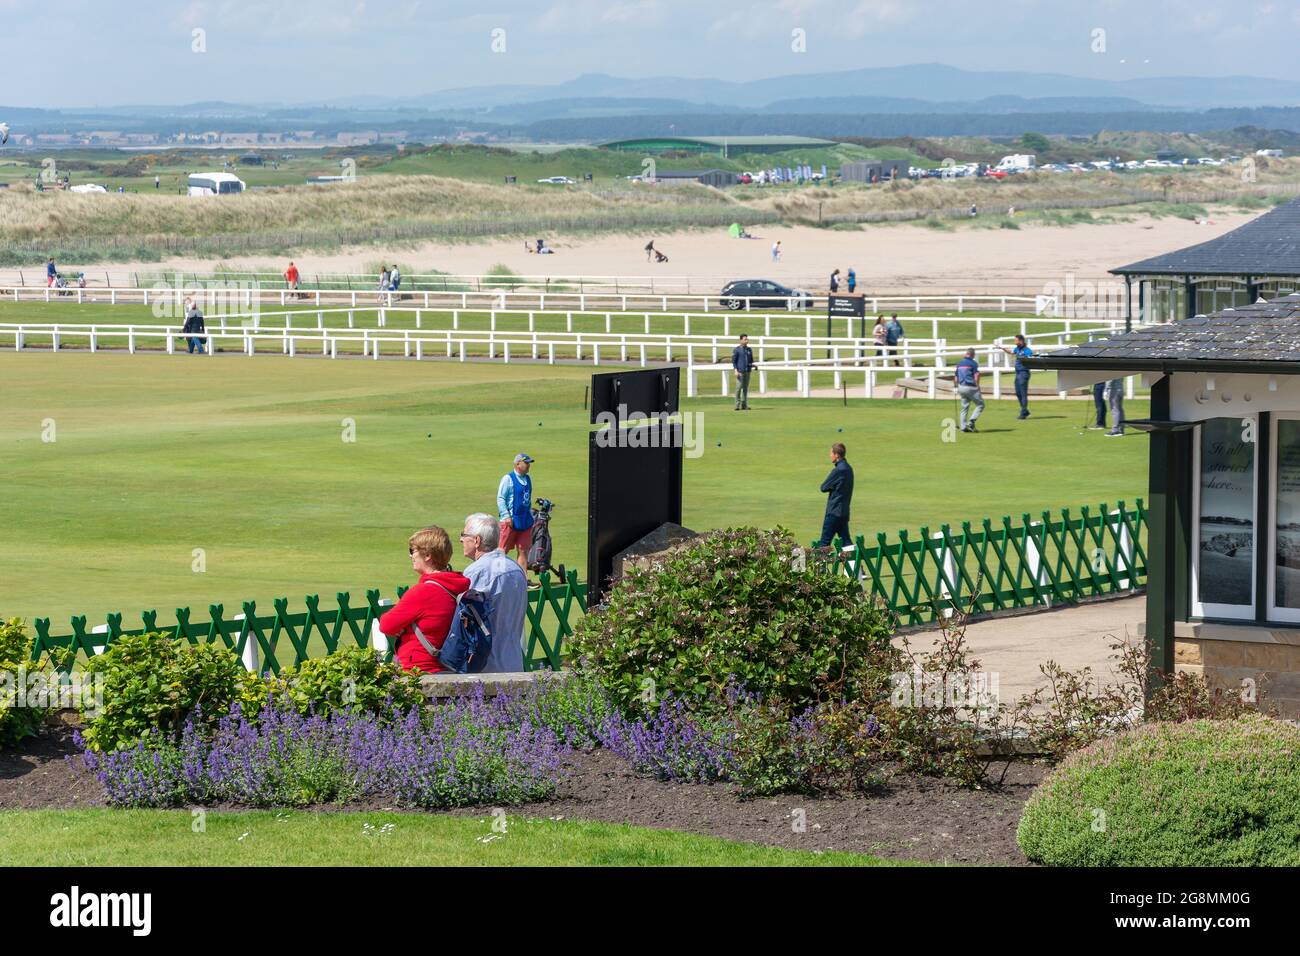 Beach and putting green, The Old Course, The Royal and Ancient Golf Club of St Andrews, St Andrews, Fife, Scotland, United Kingdom Stock Photo